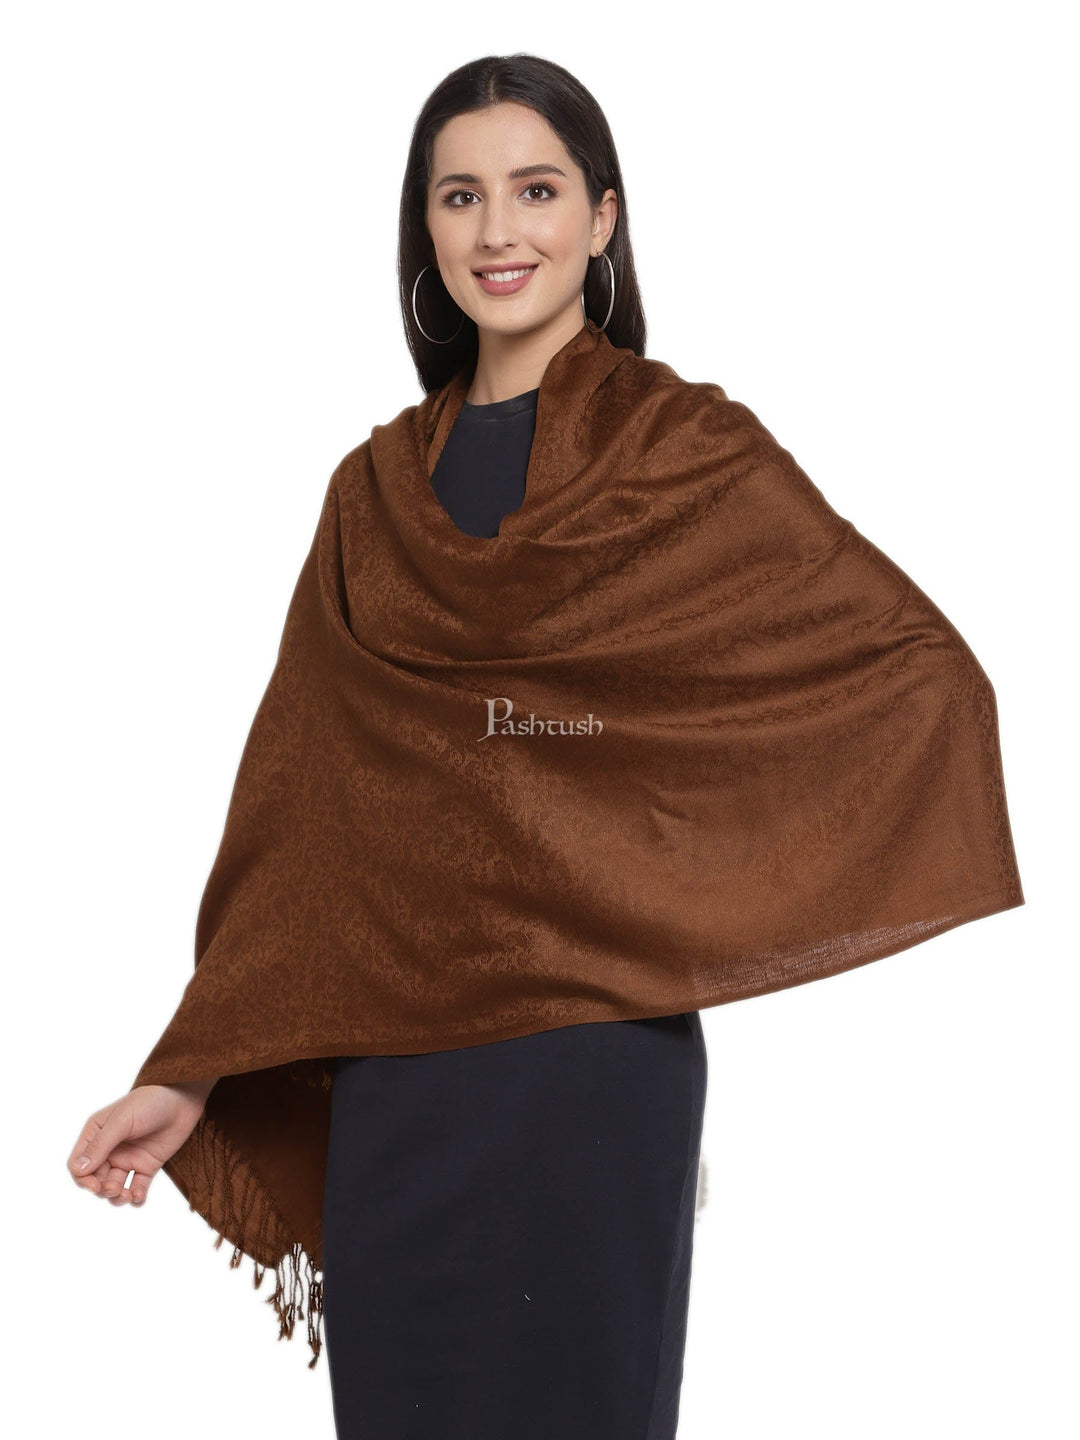 Pashtush India Womens Stoles and Scarves Scarf Pashtush Womens Scarf, Stole Jacquard Paisley, Coffee